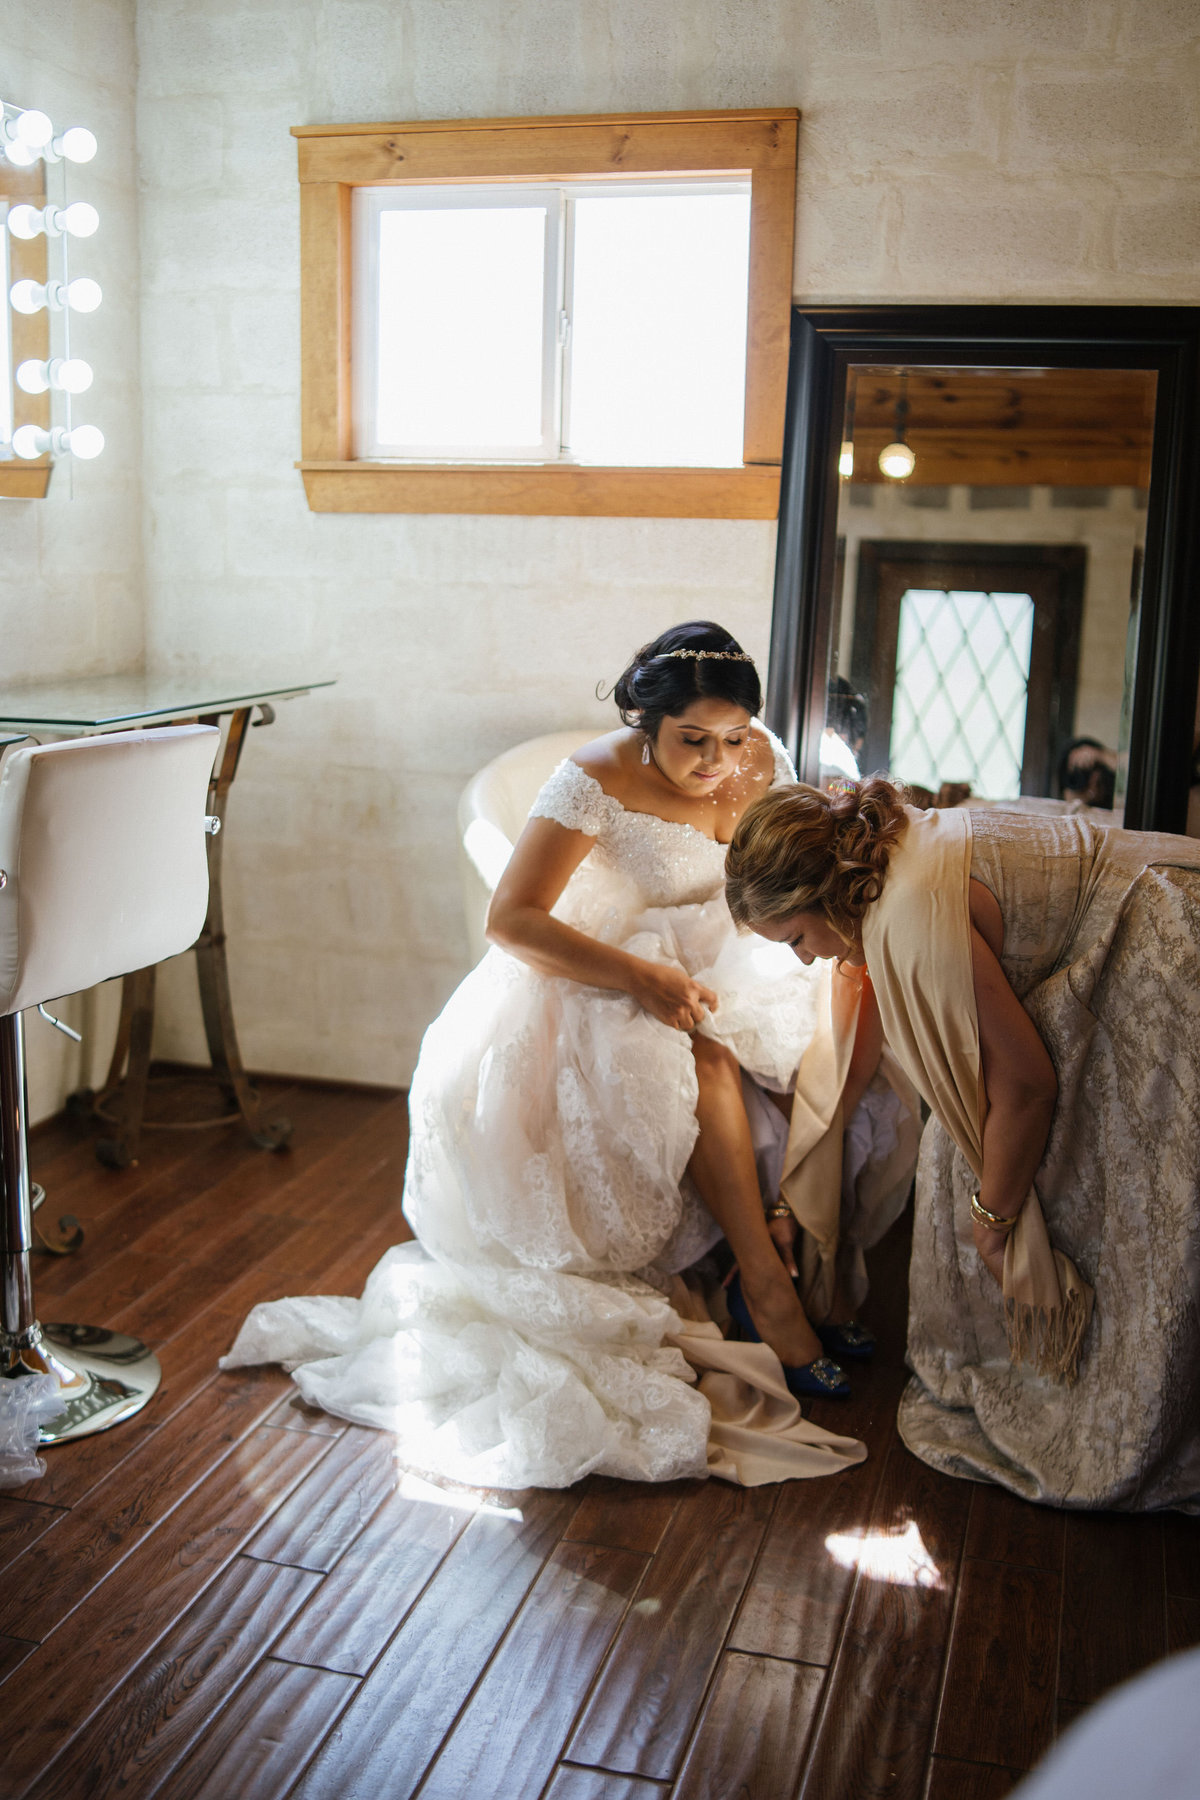 Mother of bride helping daughter put on her wedding shoes during getting ready for ceremony at Oaks of Heavenly venue